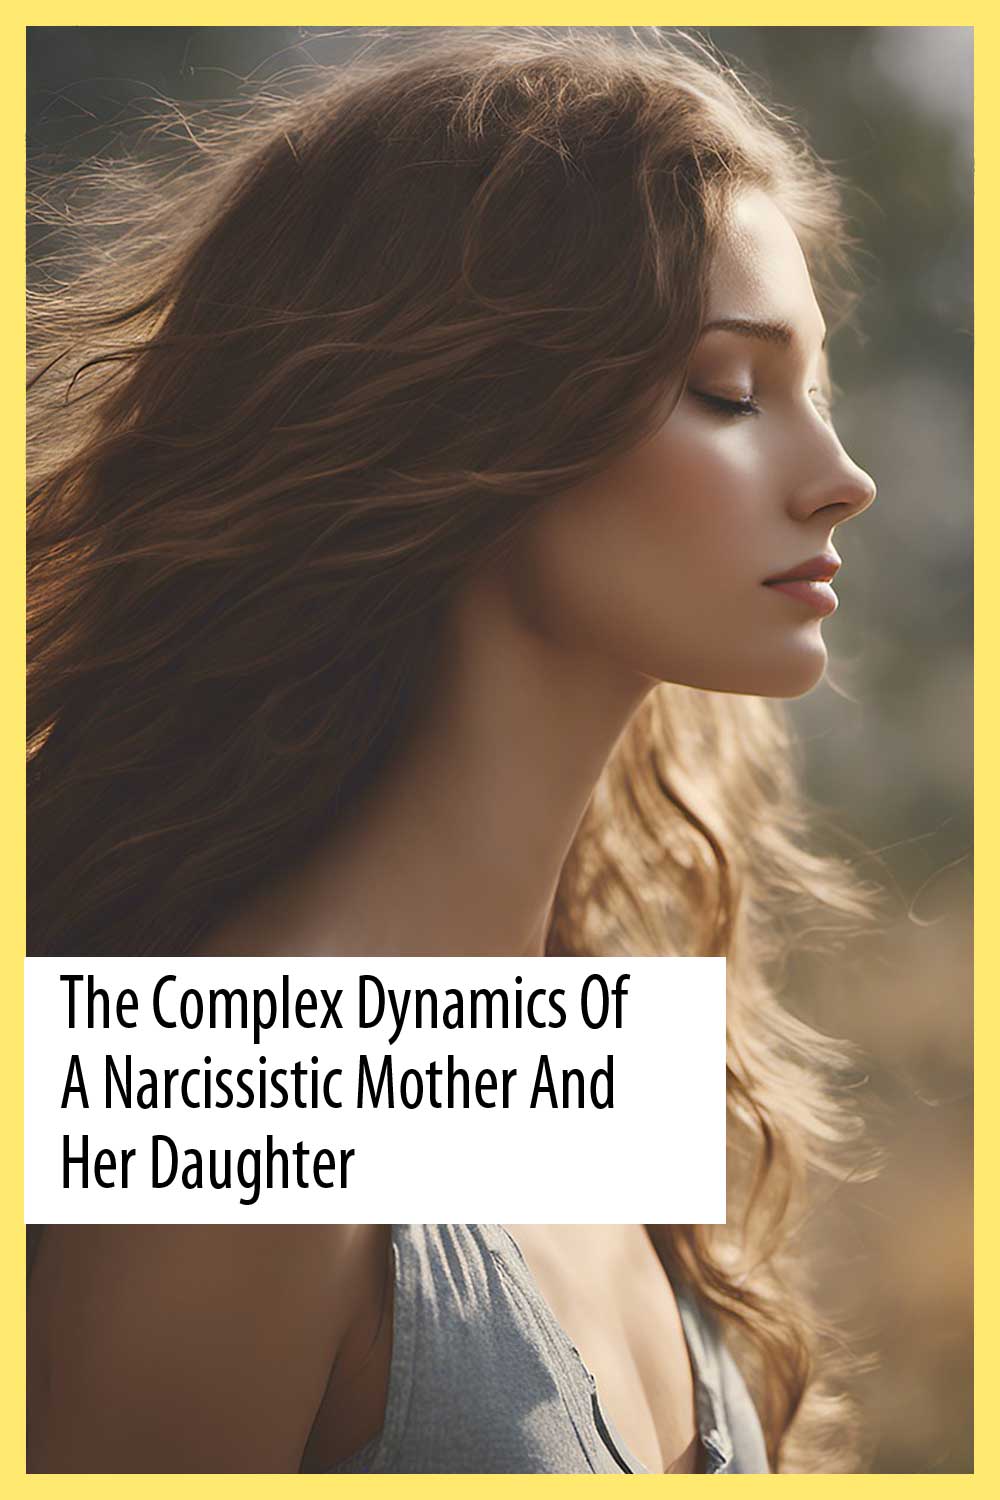 The Complex Dynamics of a Narcissistic Mother and Her Daughter